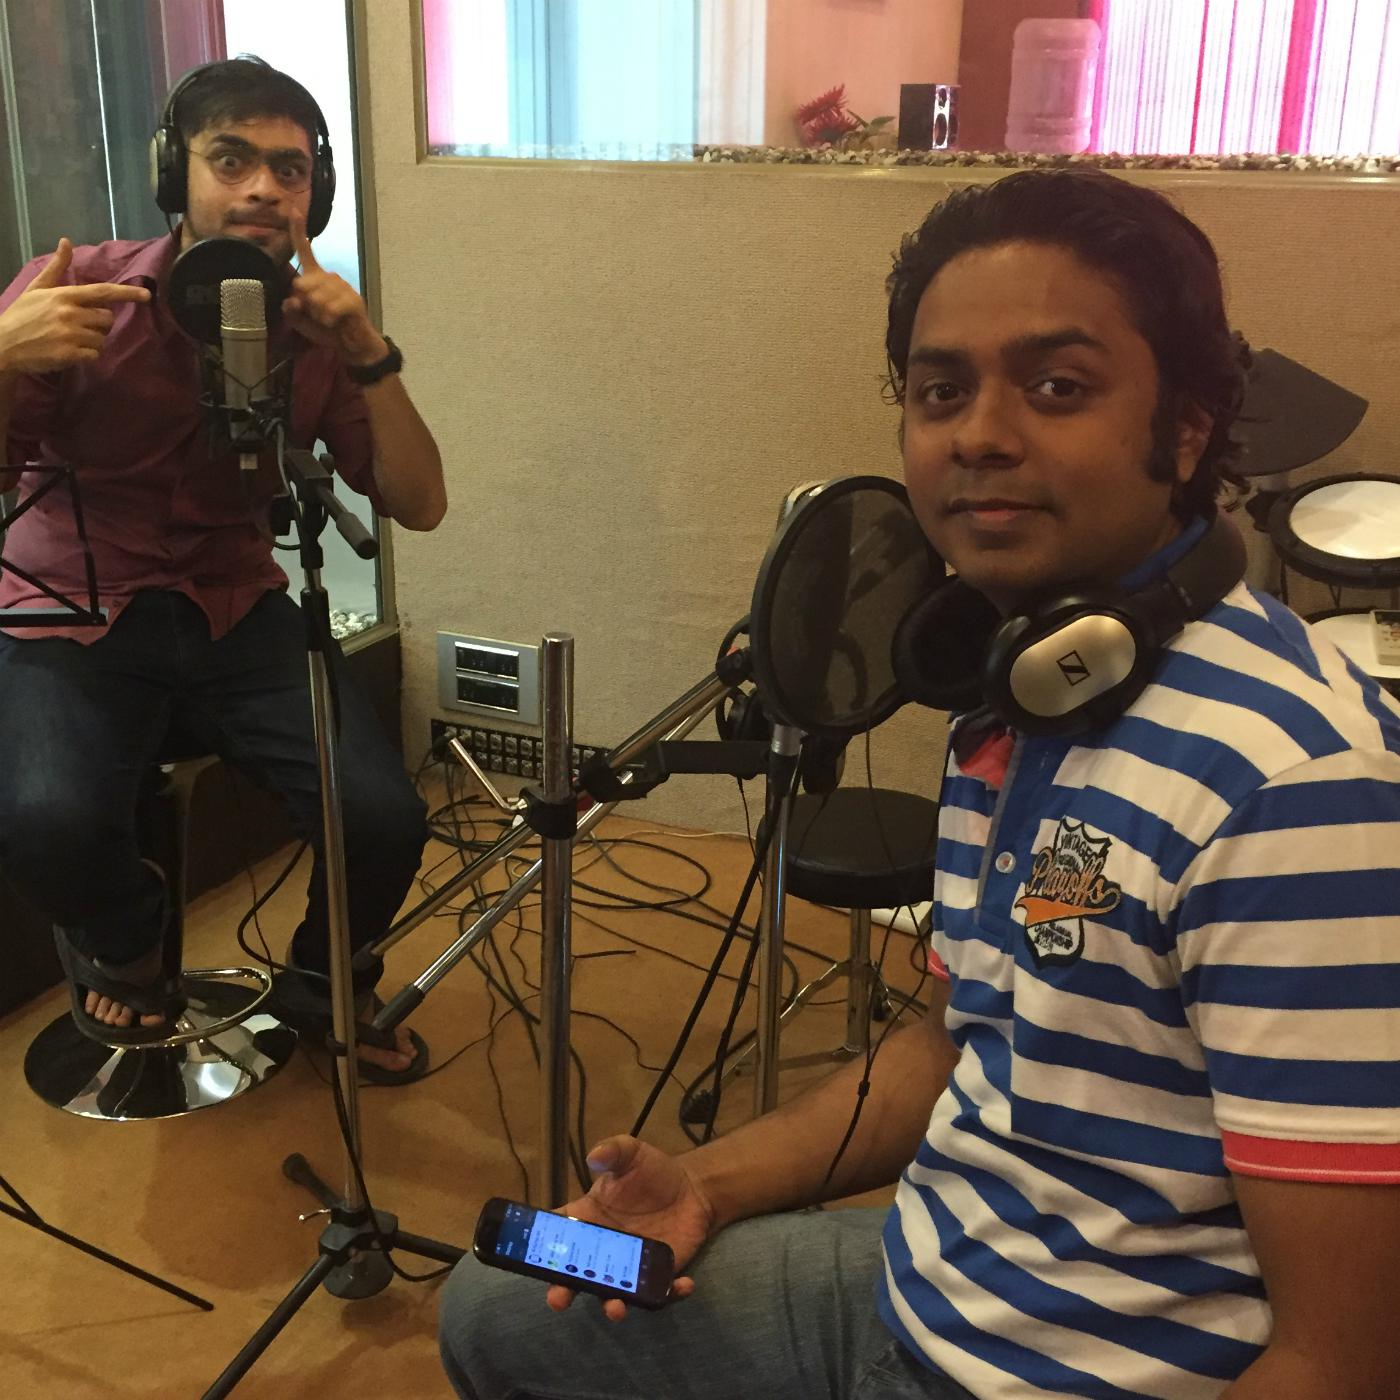 TFG Football Ep. 04: Protesting Punishment and Poetic Play - this week in I-League, AFC Cup and national team camp